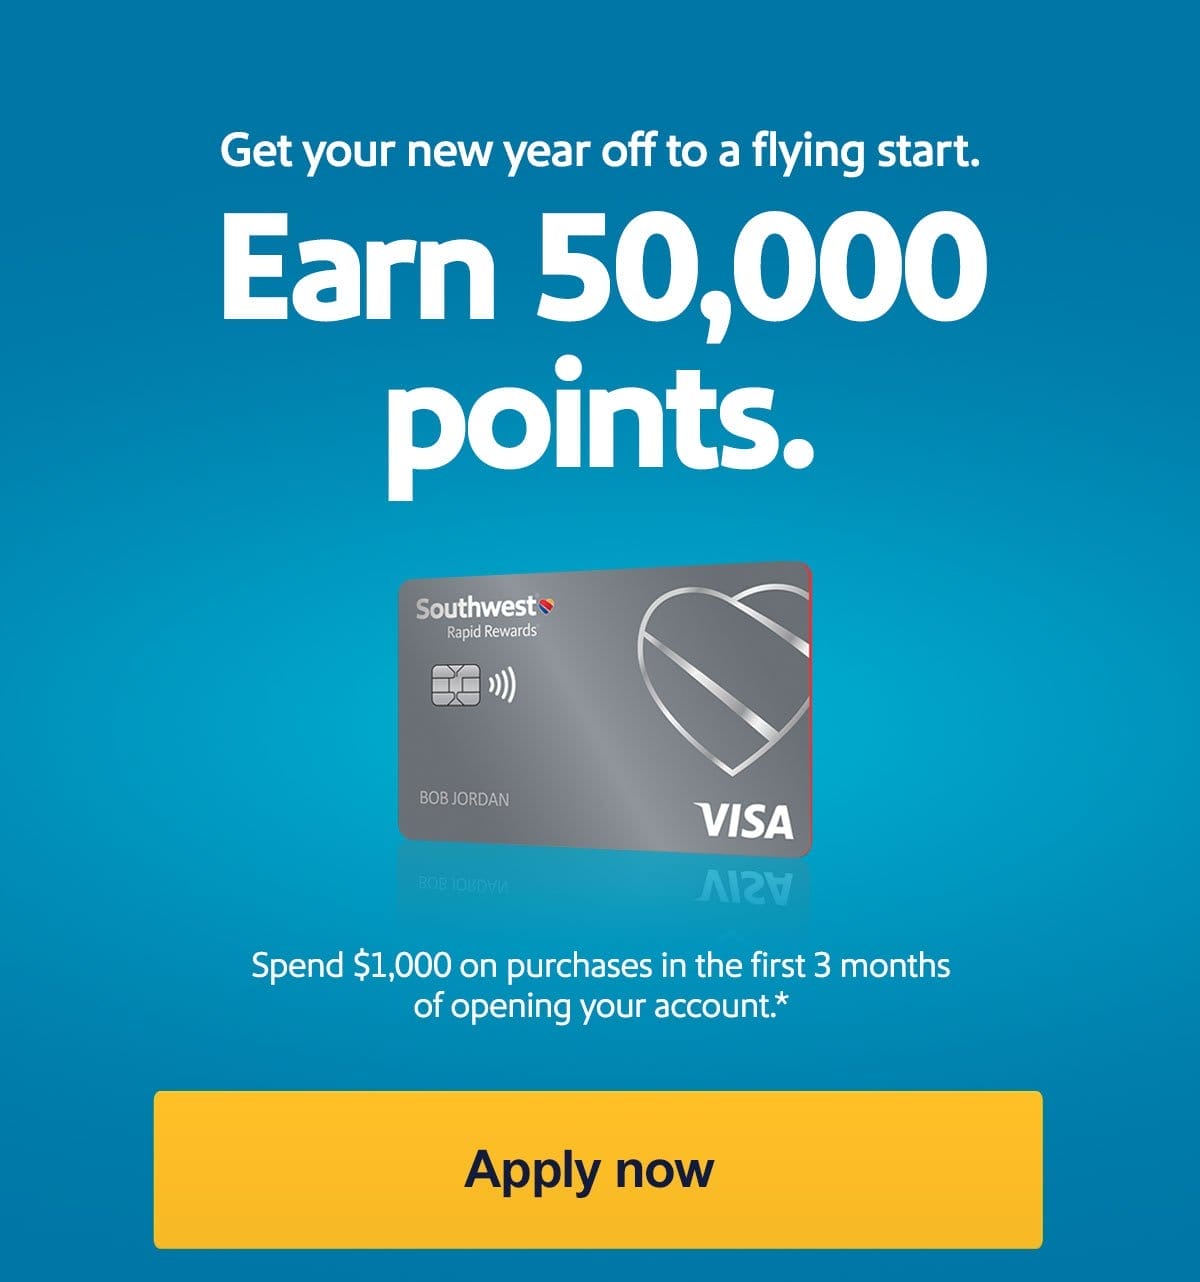 Get your new year off to a flying start. Earn 50,000 bonus points. Spend \\$1,000 on purchases in the first 3 months of opening your account* [Apply now]